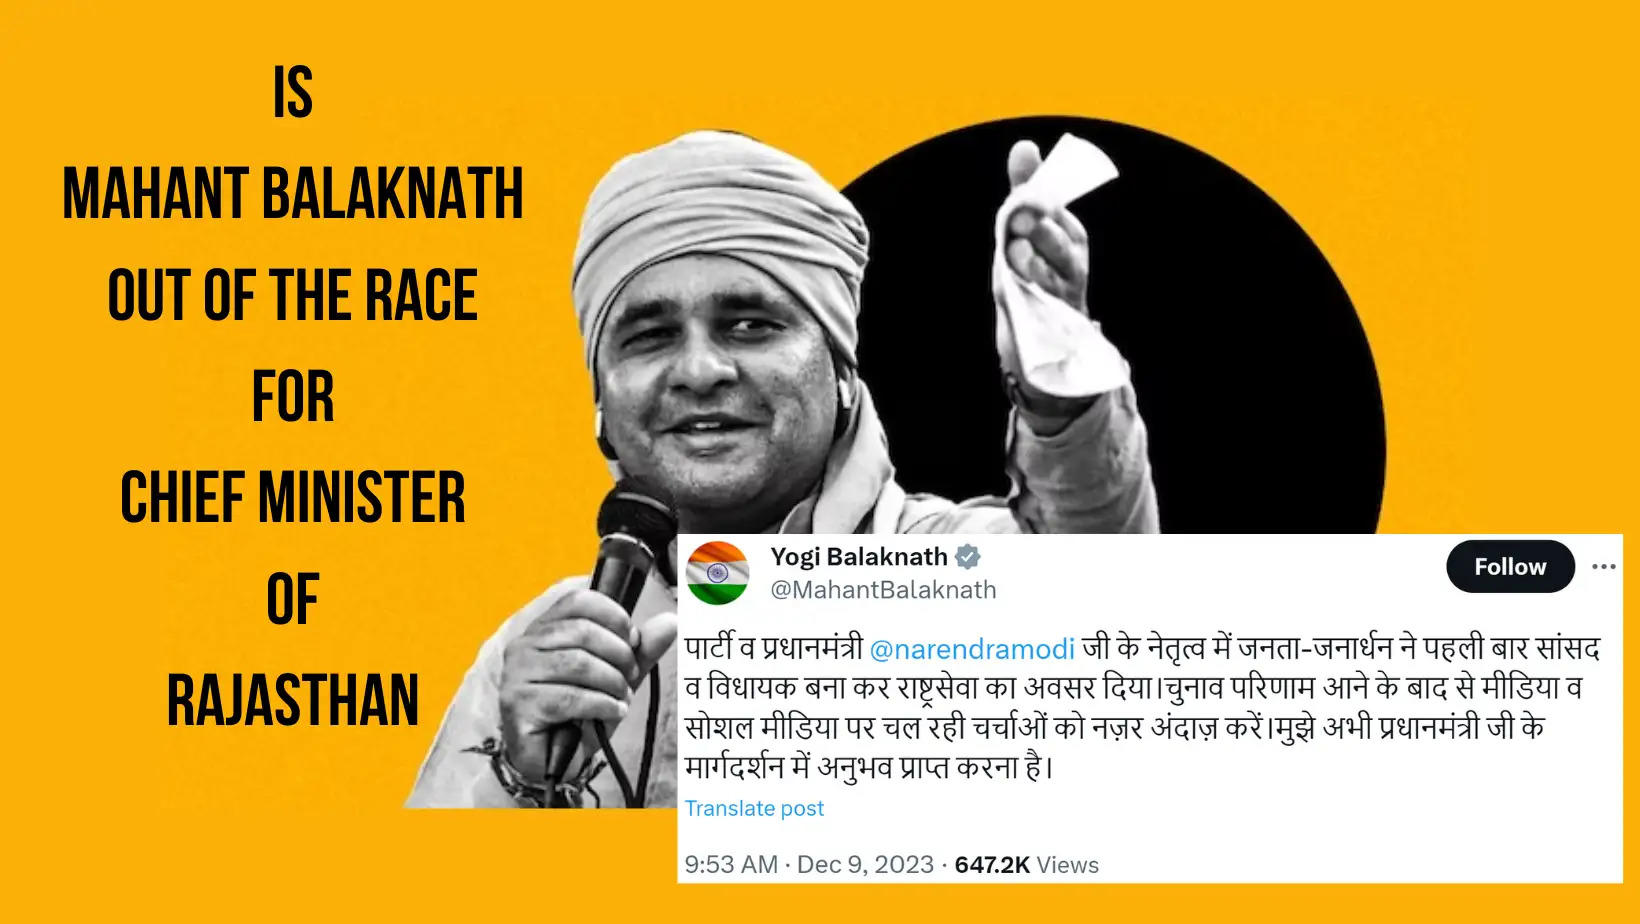 Mahant Balaknath seems to have exited the Race for Chief Minister of Rajasthan Tweets to Ignore Speculations